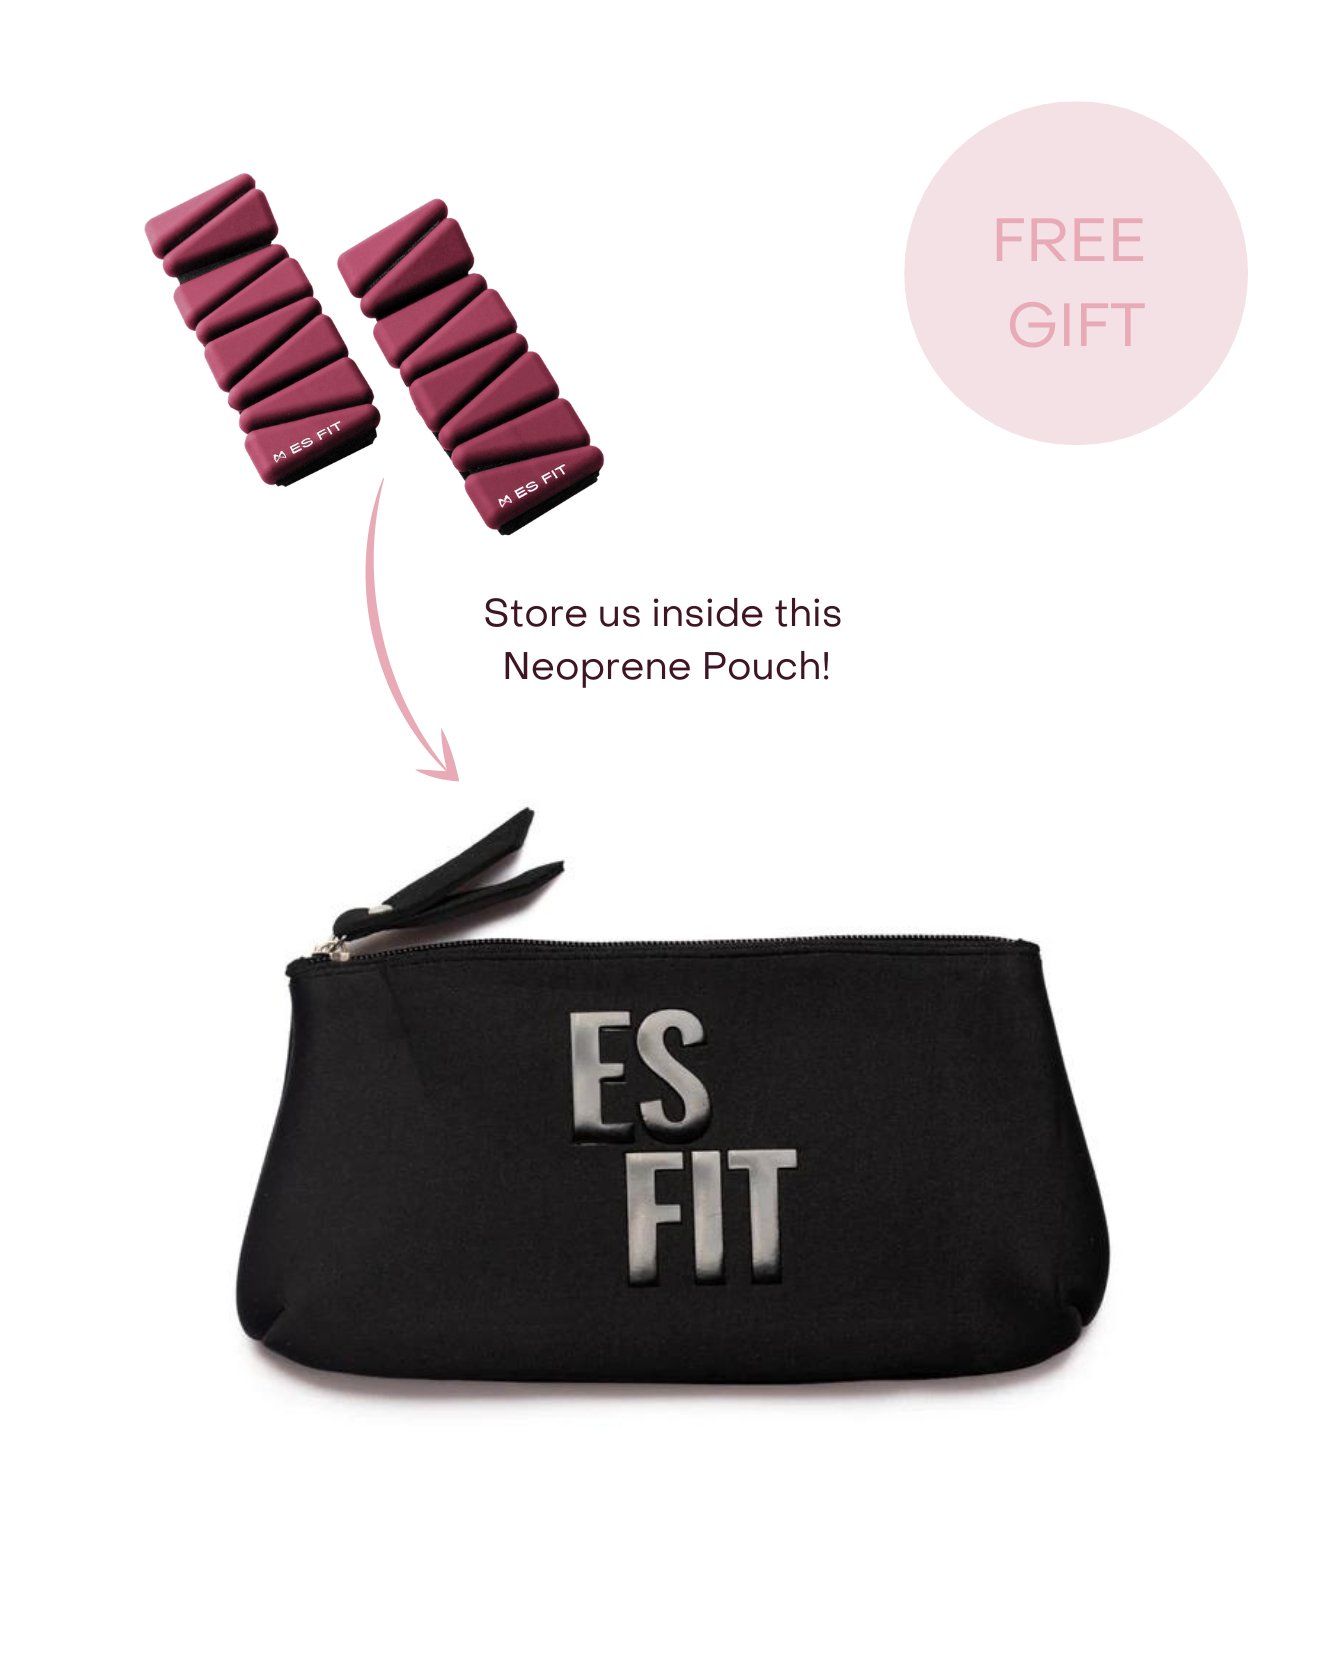 This is the ultimate bundle for all fit lovers! Heavy Ankle Weights + Fabric Long Loop Resistance Bands + Sweat Towel. Save $34 by shopping this bundle.